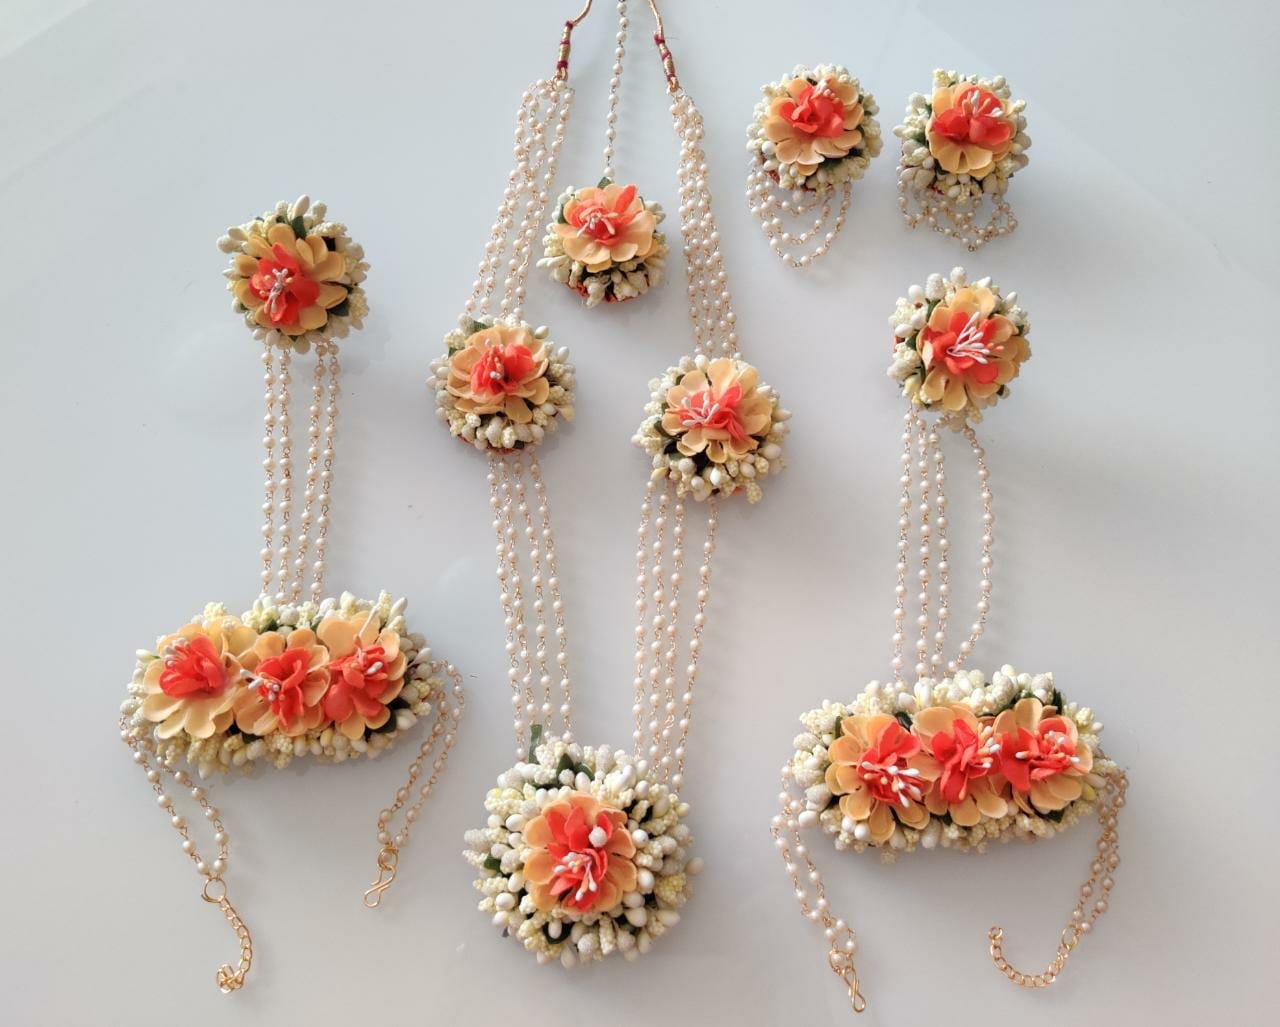 Orange and white floral set for baby shower